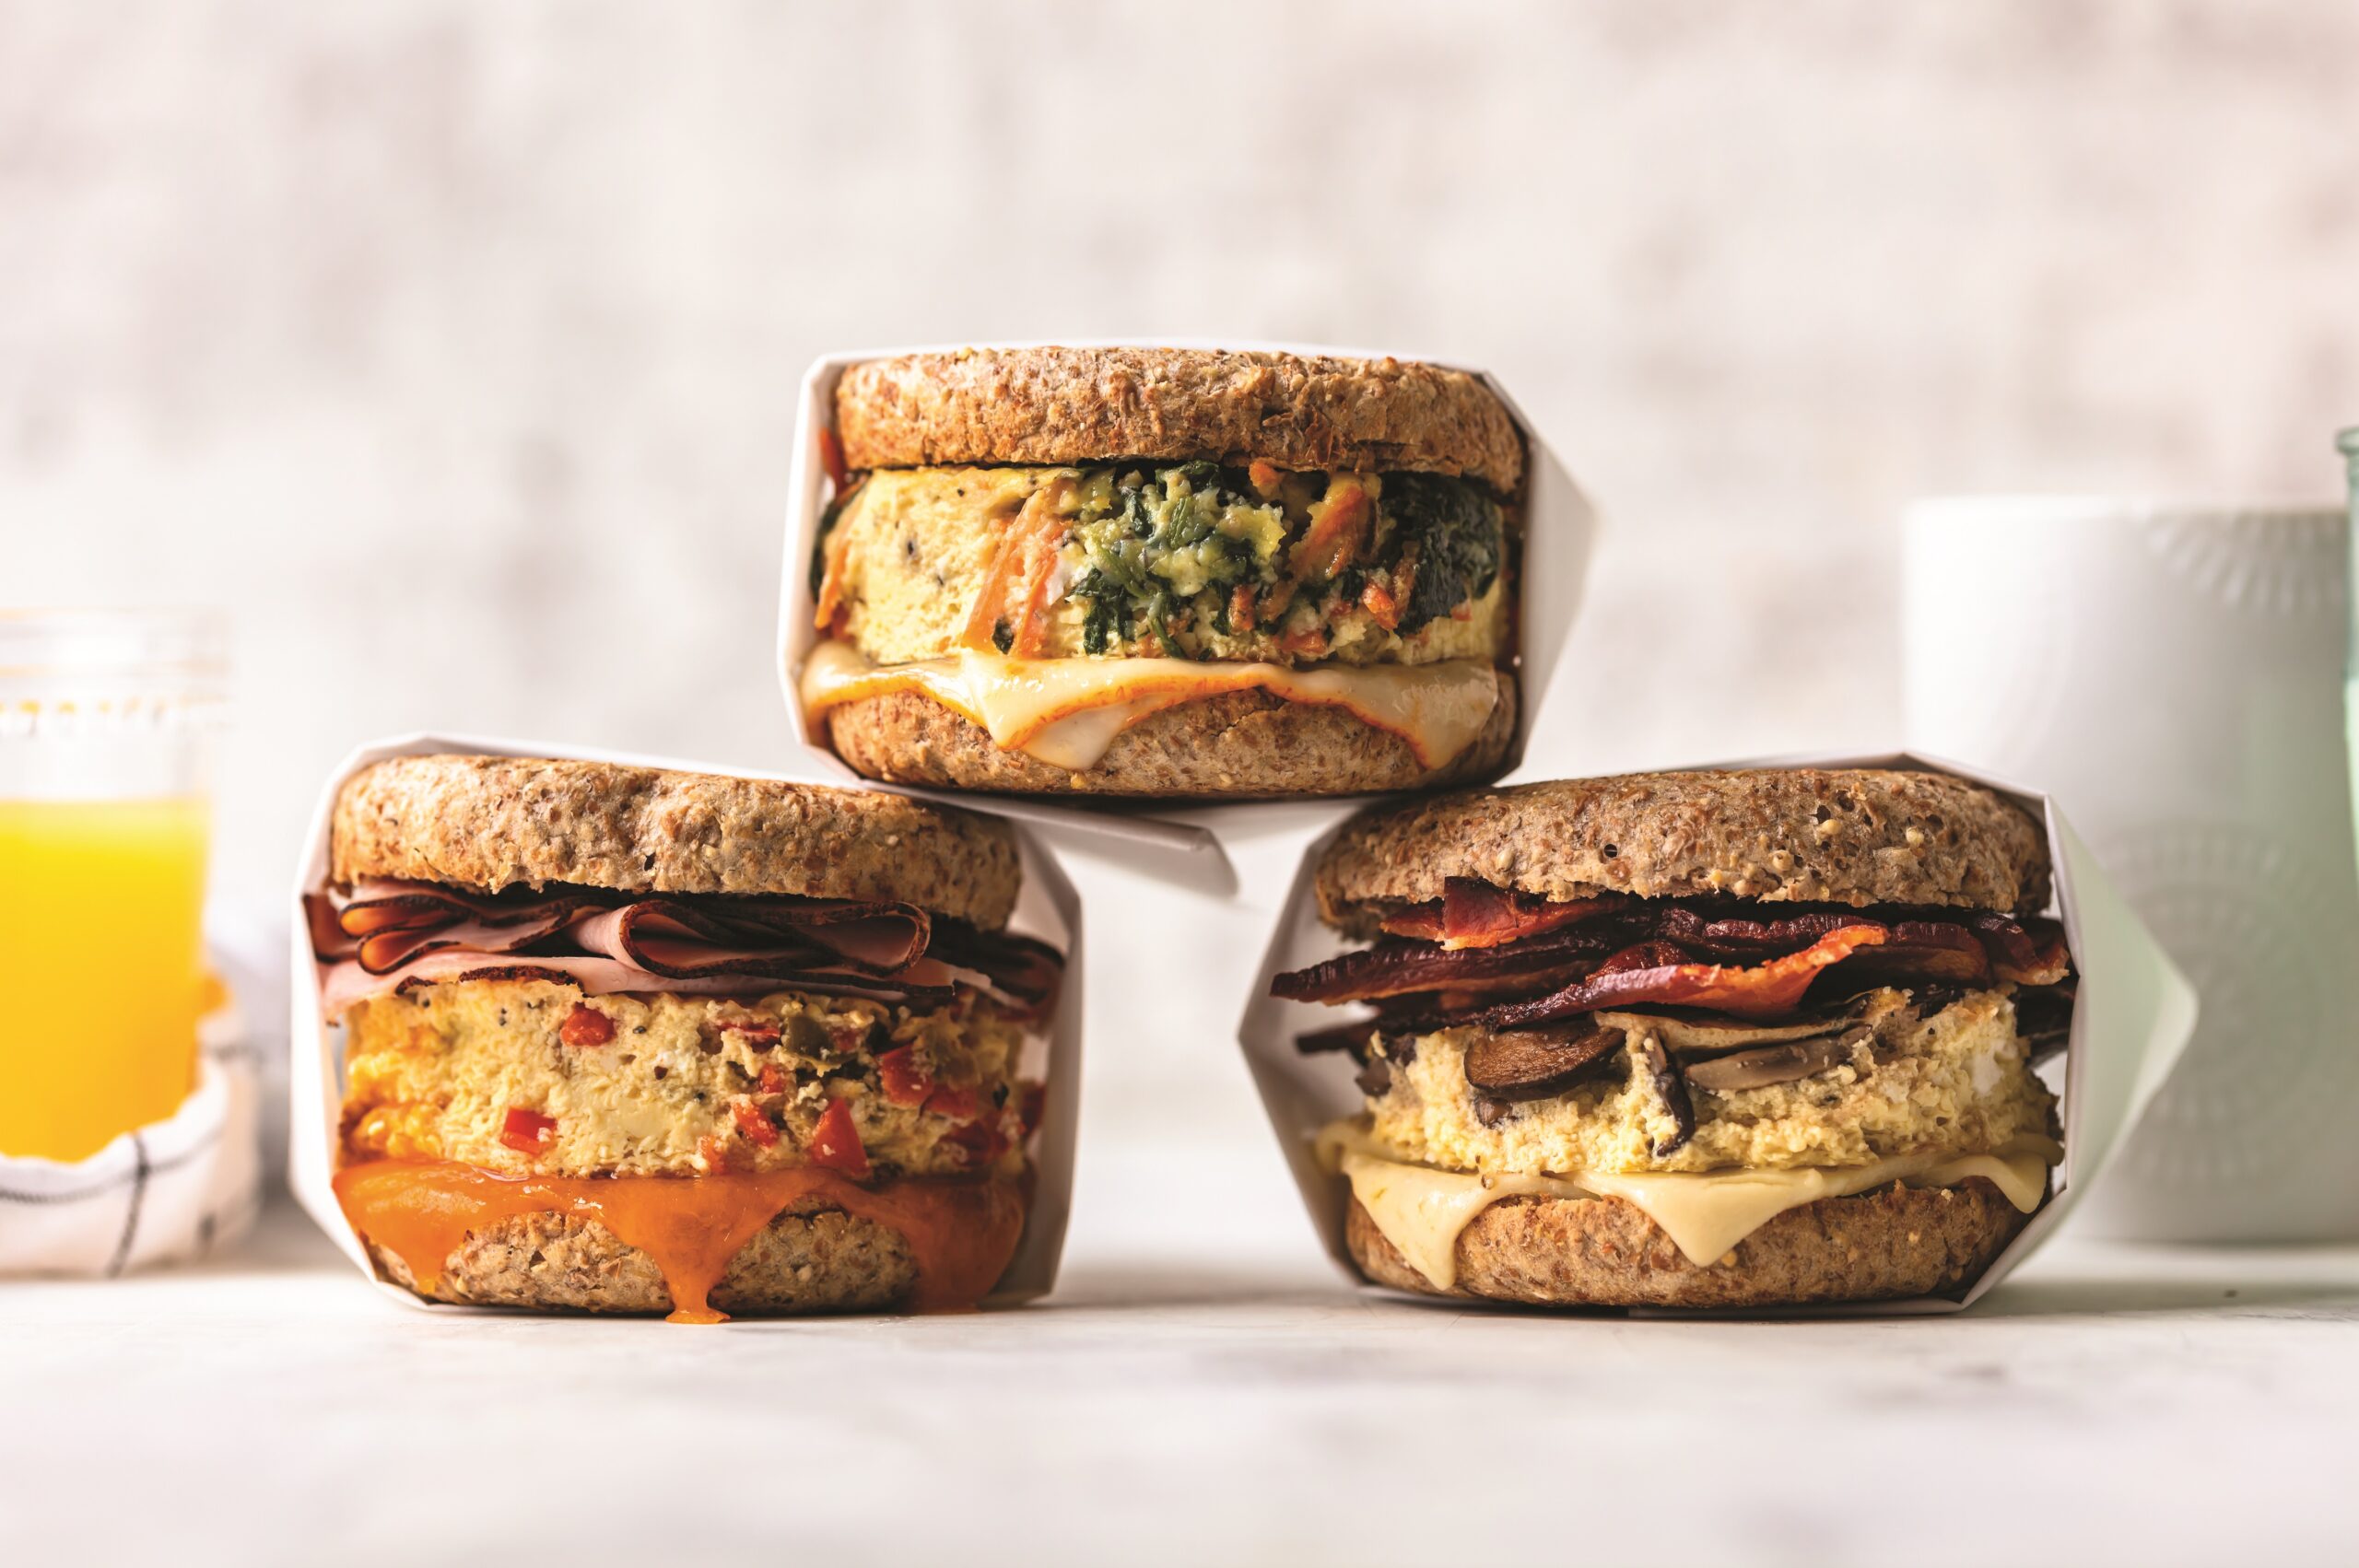 Freezer meal sandwiches